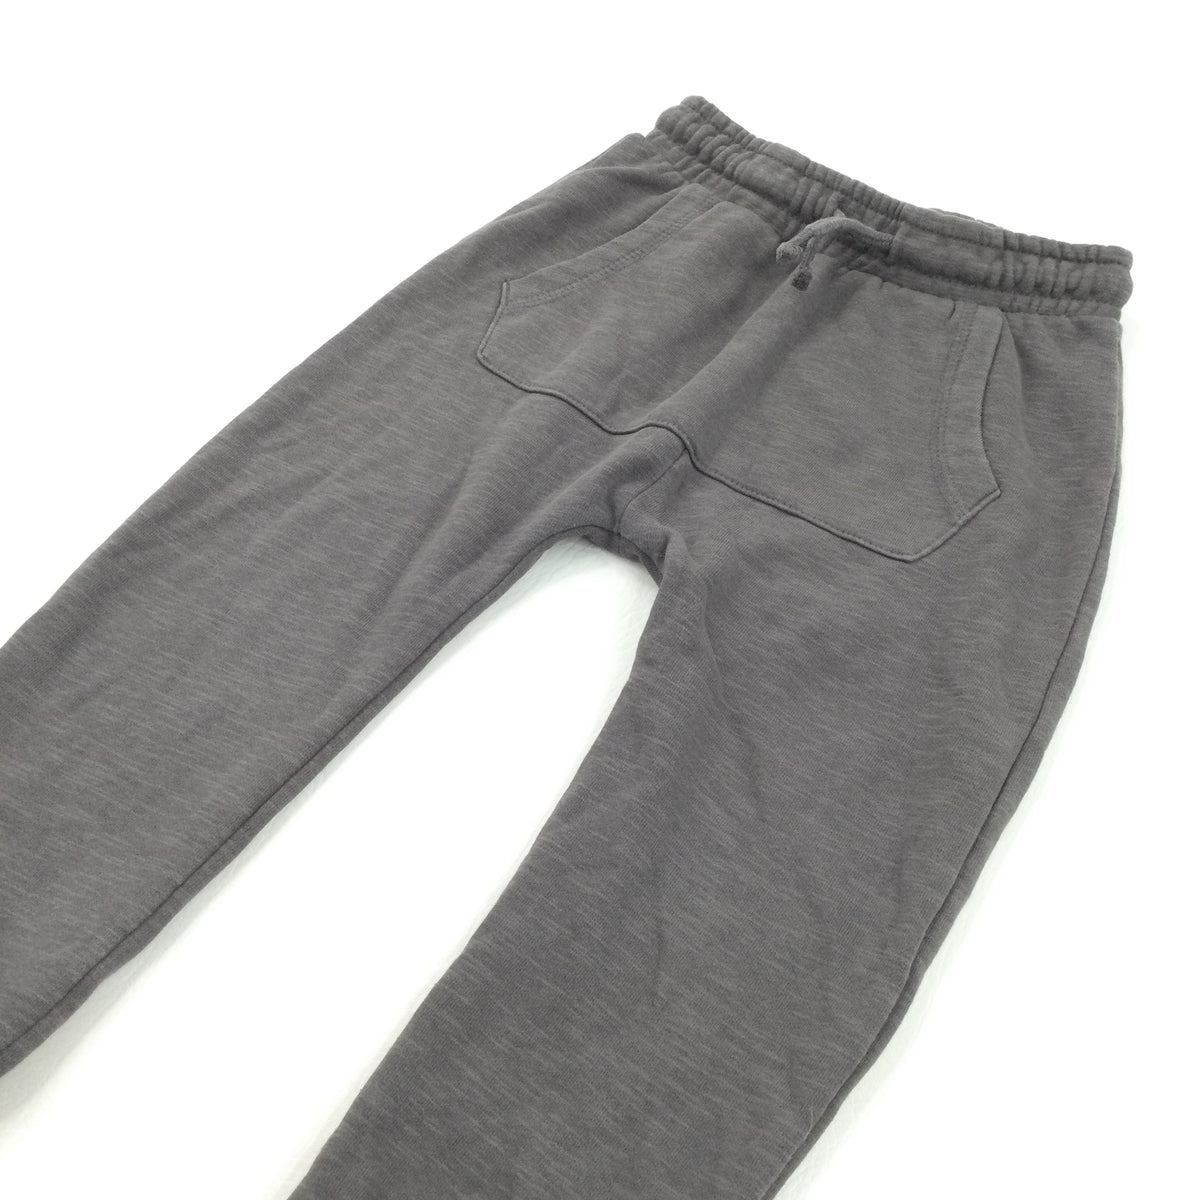 Brown Tracksuit Bottoms - Boys/Girls 3-4 Years – Katie's Kids Clothes